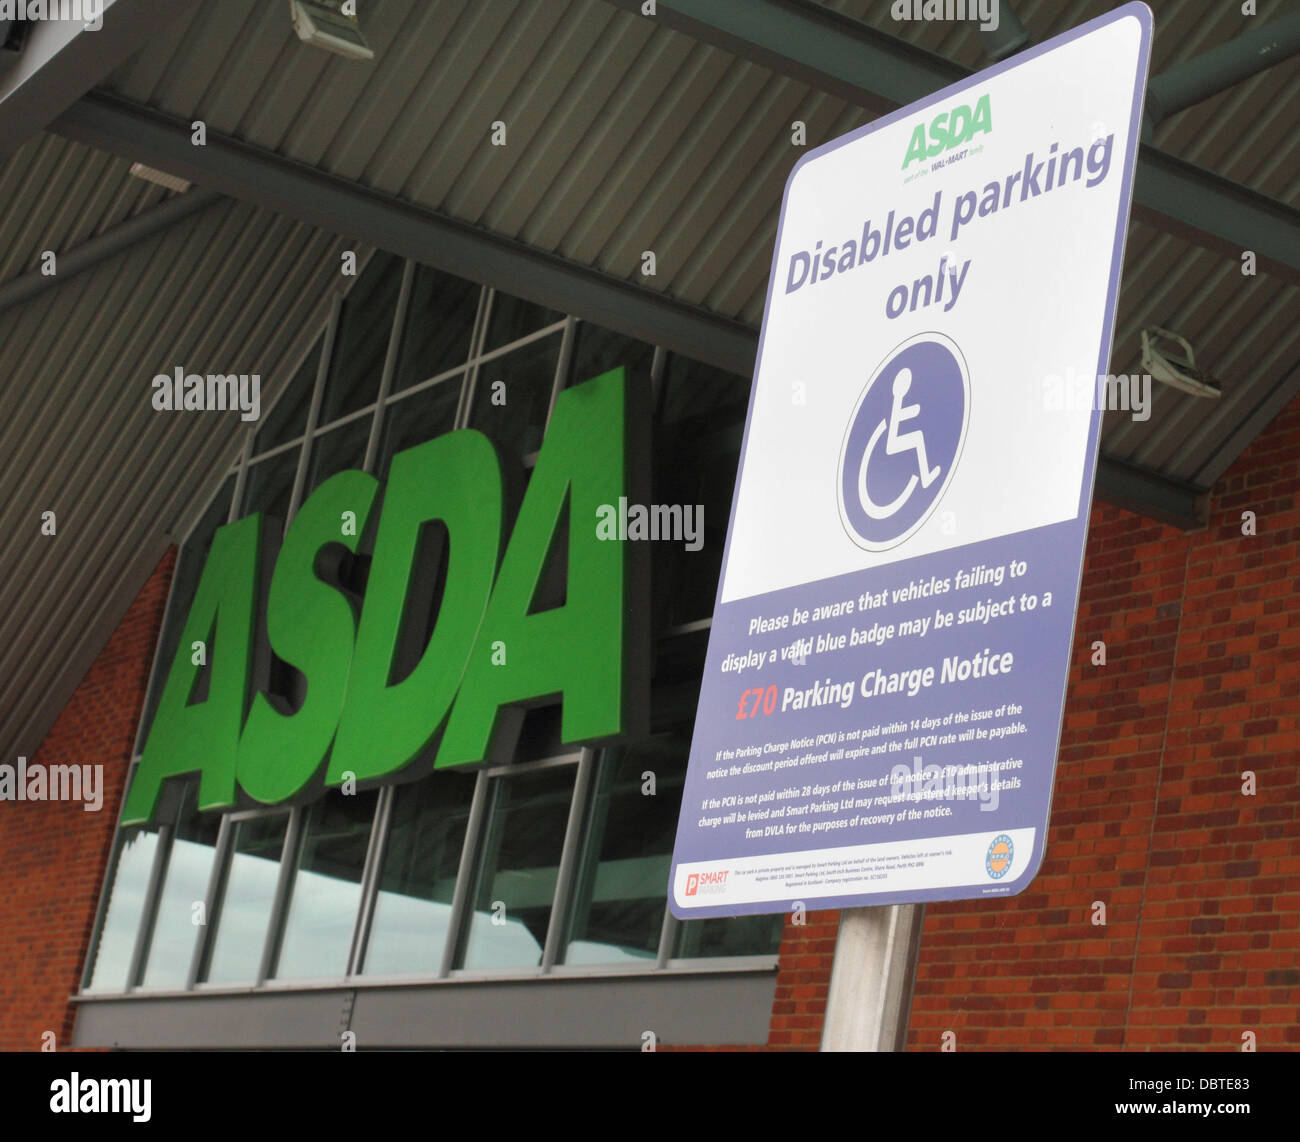 Biggleswade, UK. 4th August, 2013. General Views of Disabled parking at Asda Supermarket, Biggleswade, Bedfordshire where a 64 yo man was severely injured yesterday (August 3rd) after an altercation with another customer over a disabled parking space.  He subsequently died in Addenbrookes Hospital, Cambridge this afternoon (Augiust 4th) and Police have arrested a 65 yo man who lives locally. Poloce are treating the man's death as manslaughter. Asda, Biggleswade, UK - Photos taken August 4th 2013  Credit:  KEITH MAYHEW/Alamy Live News Stock Photo